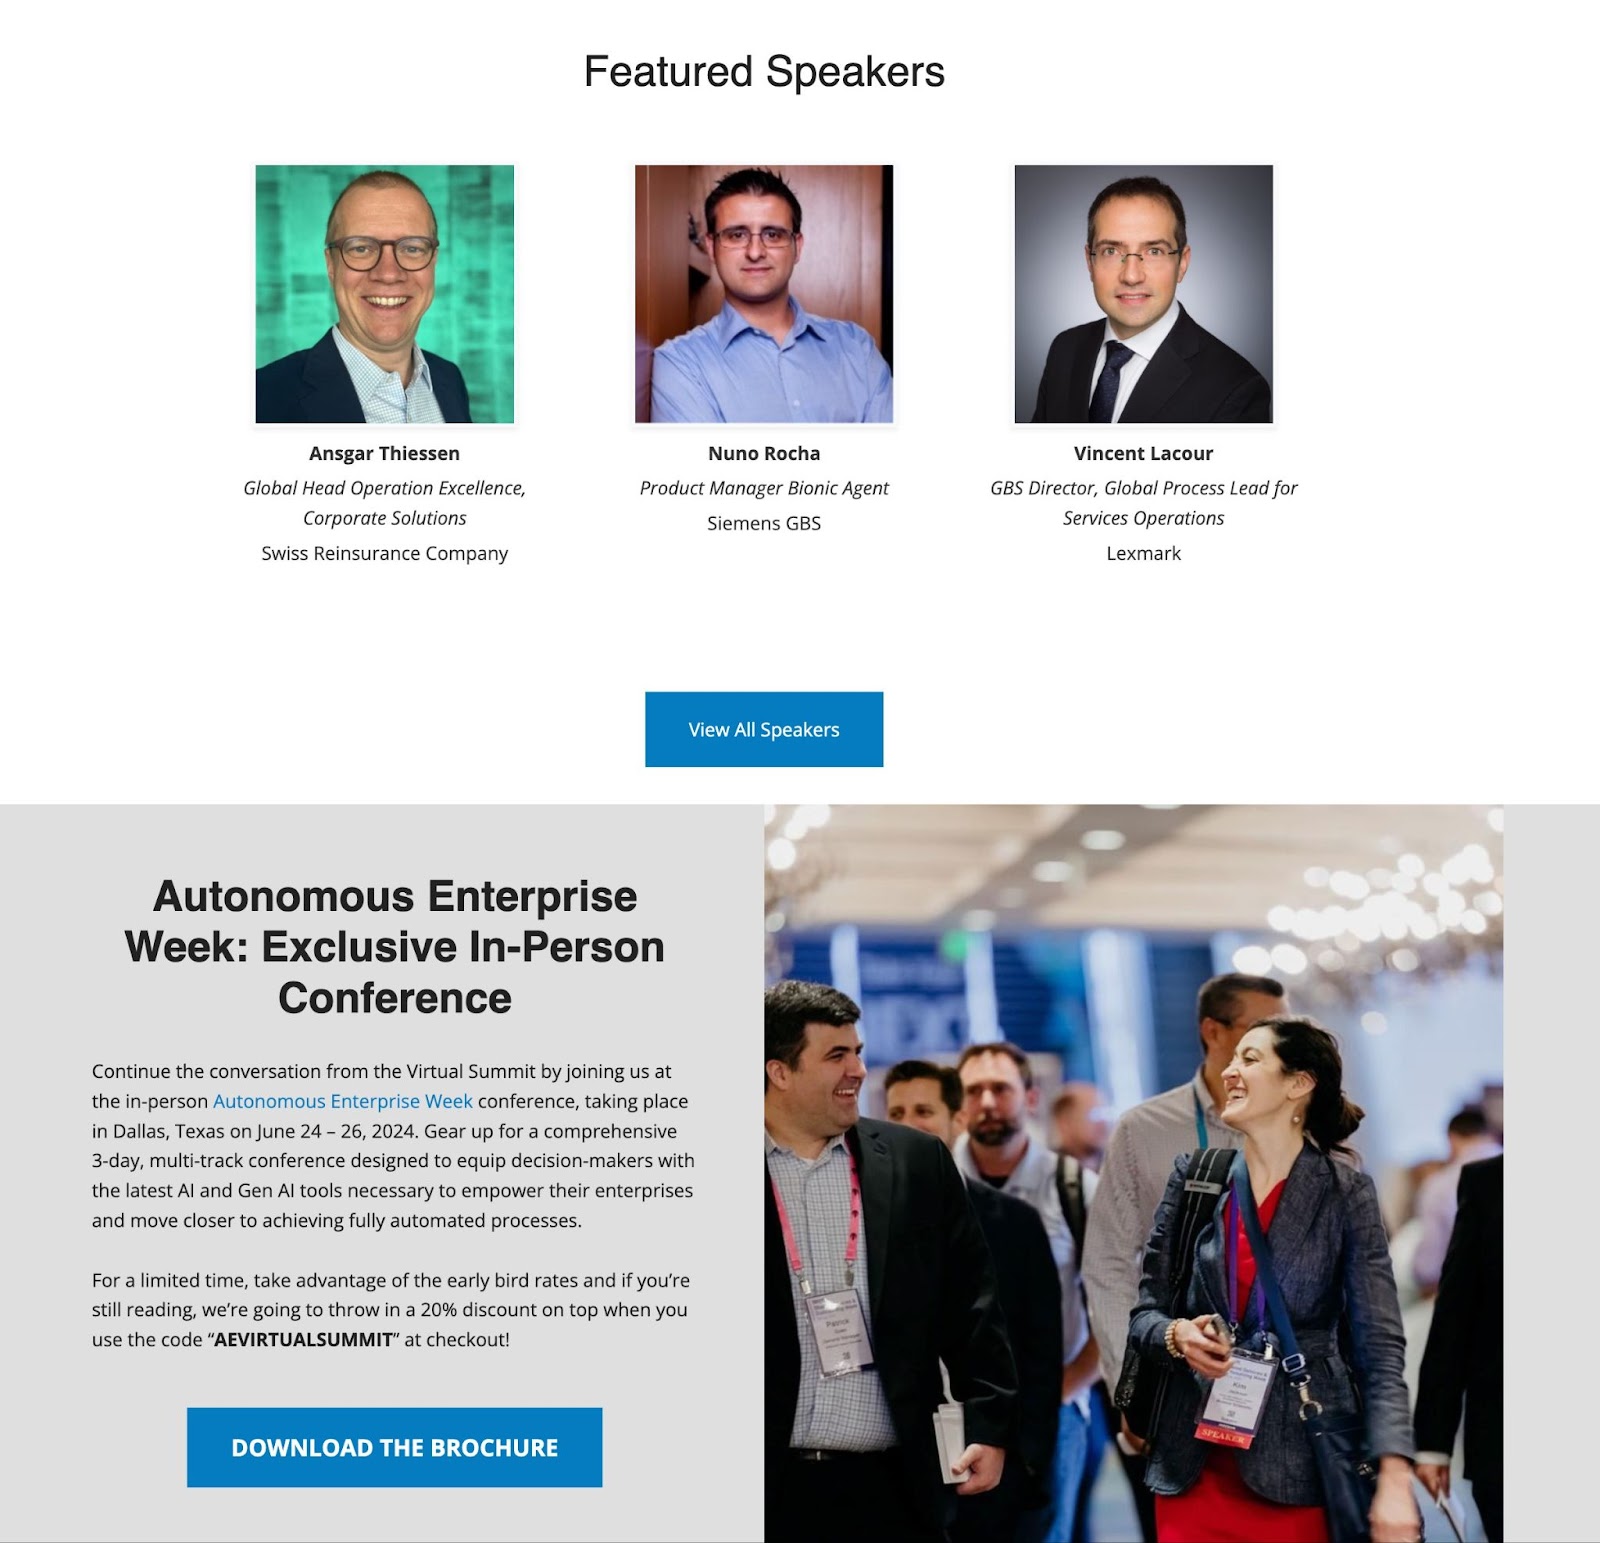 virtual summit landing page with featured speakers and the conference brochure